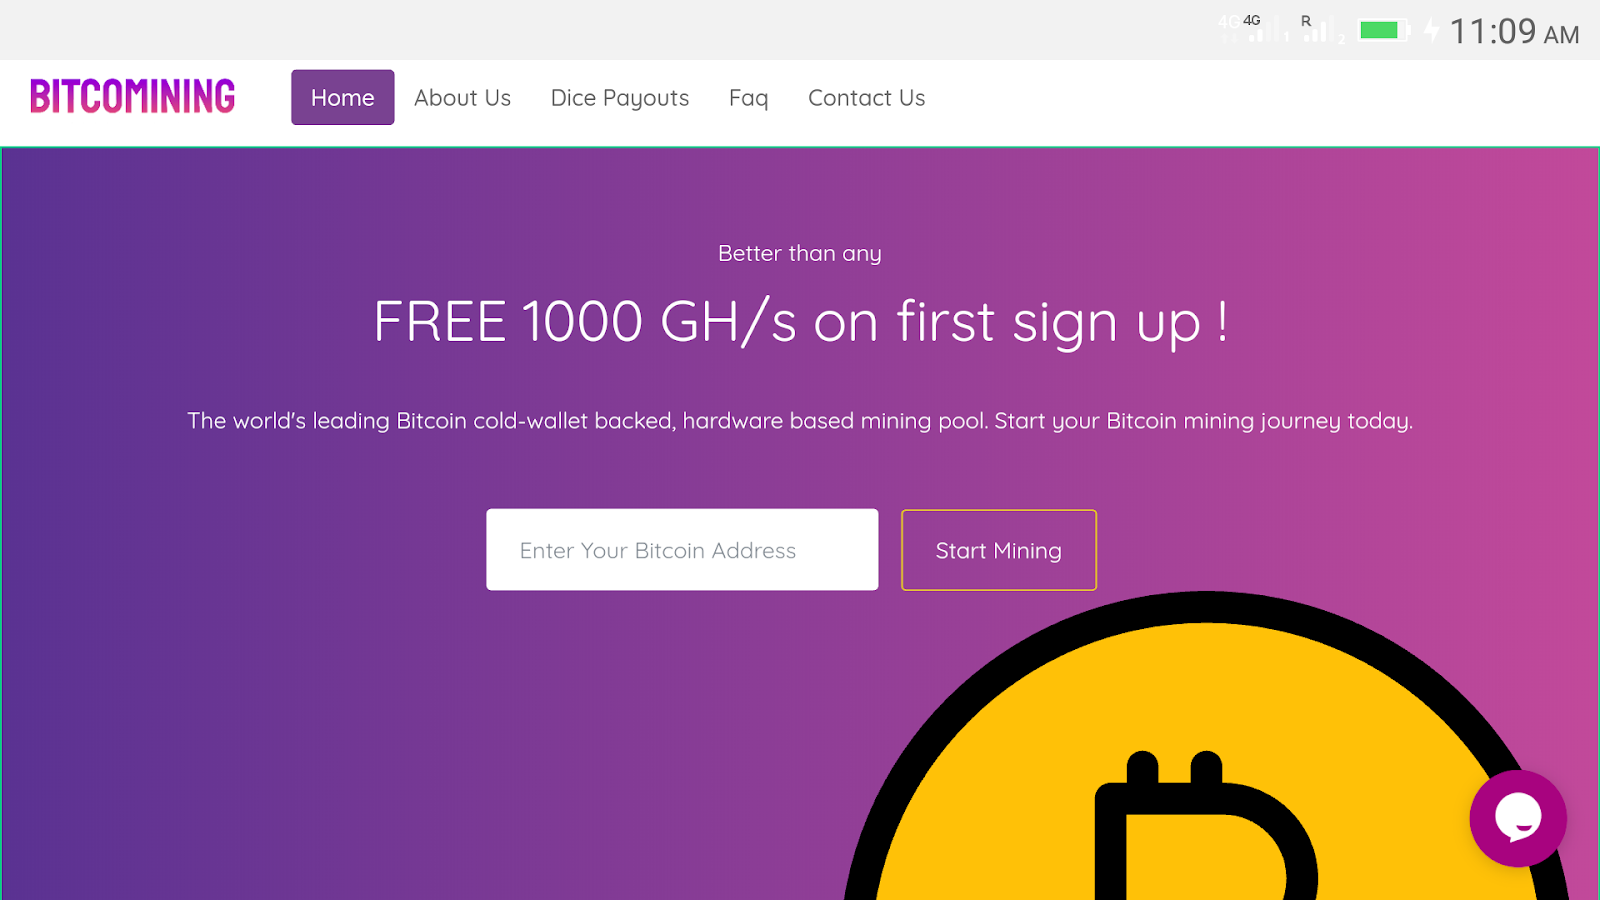 Bitcoin Mining FREE 1000 GH/s on first sign up in ...